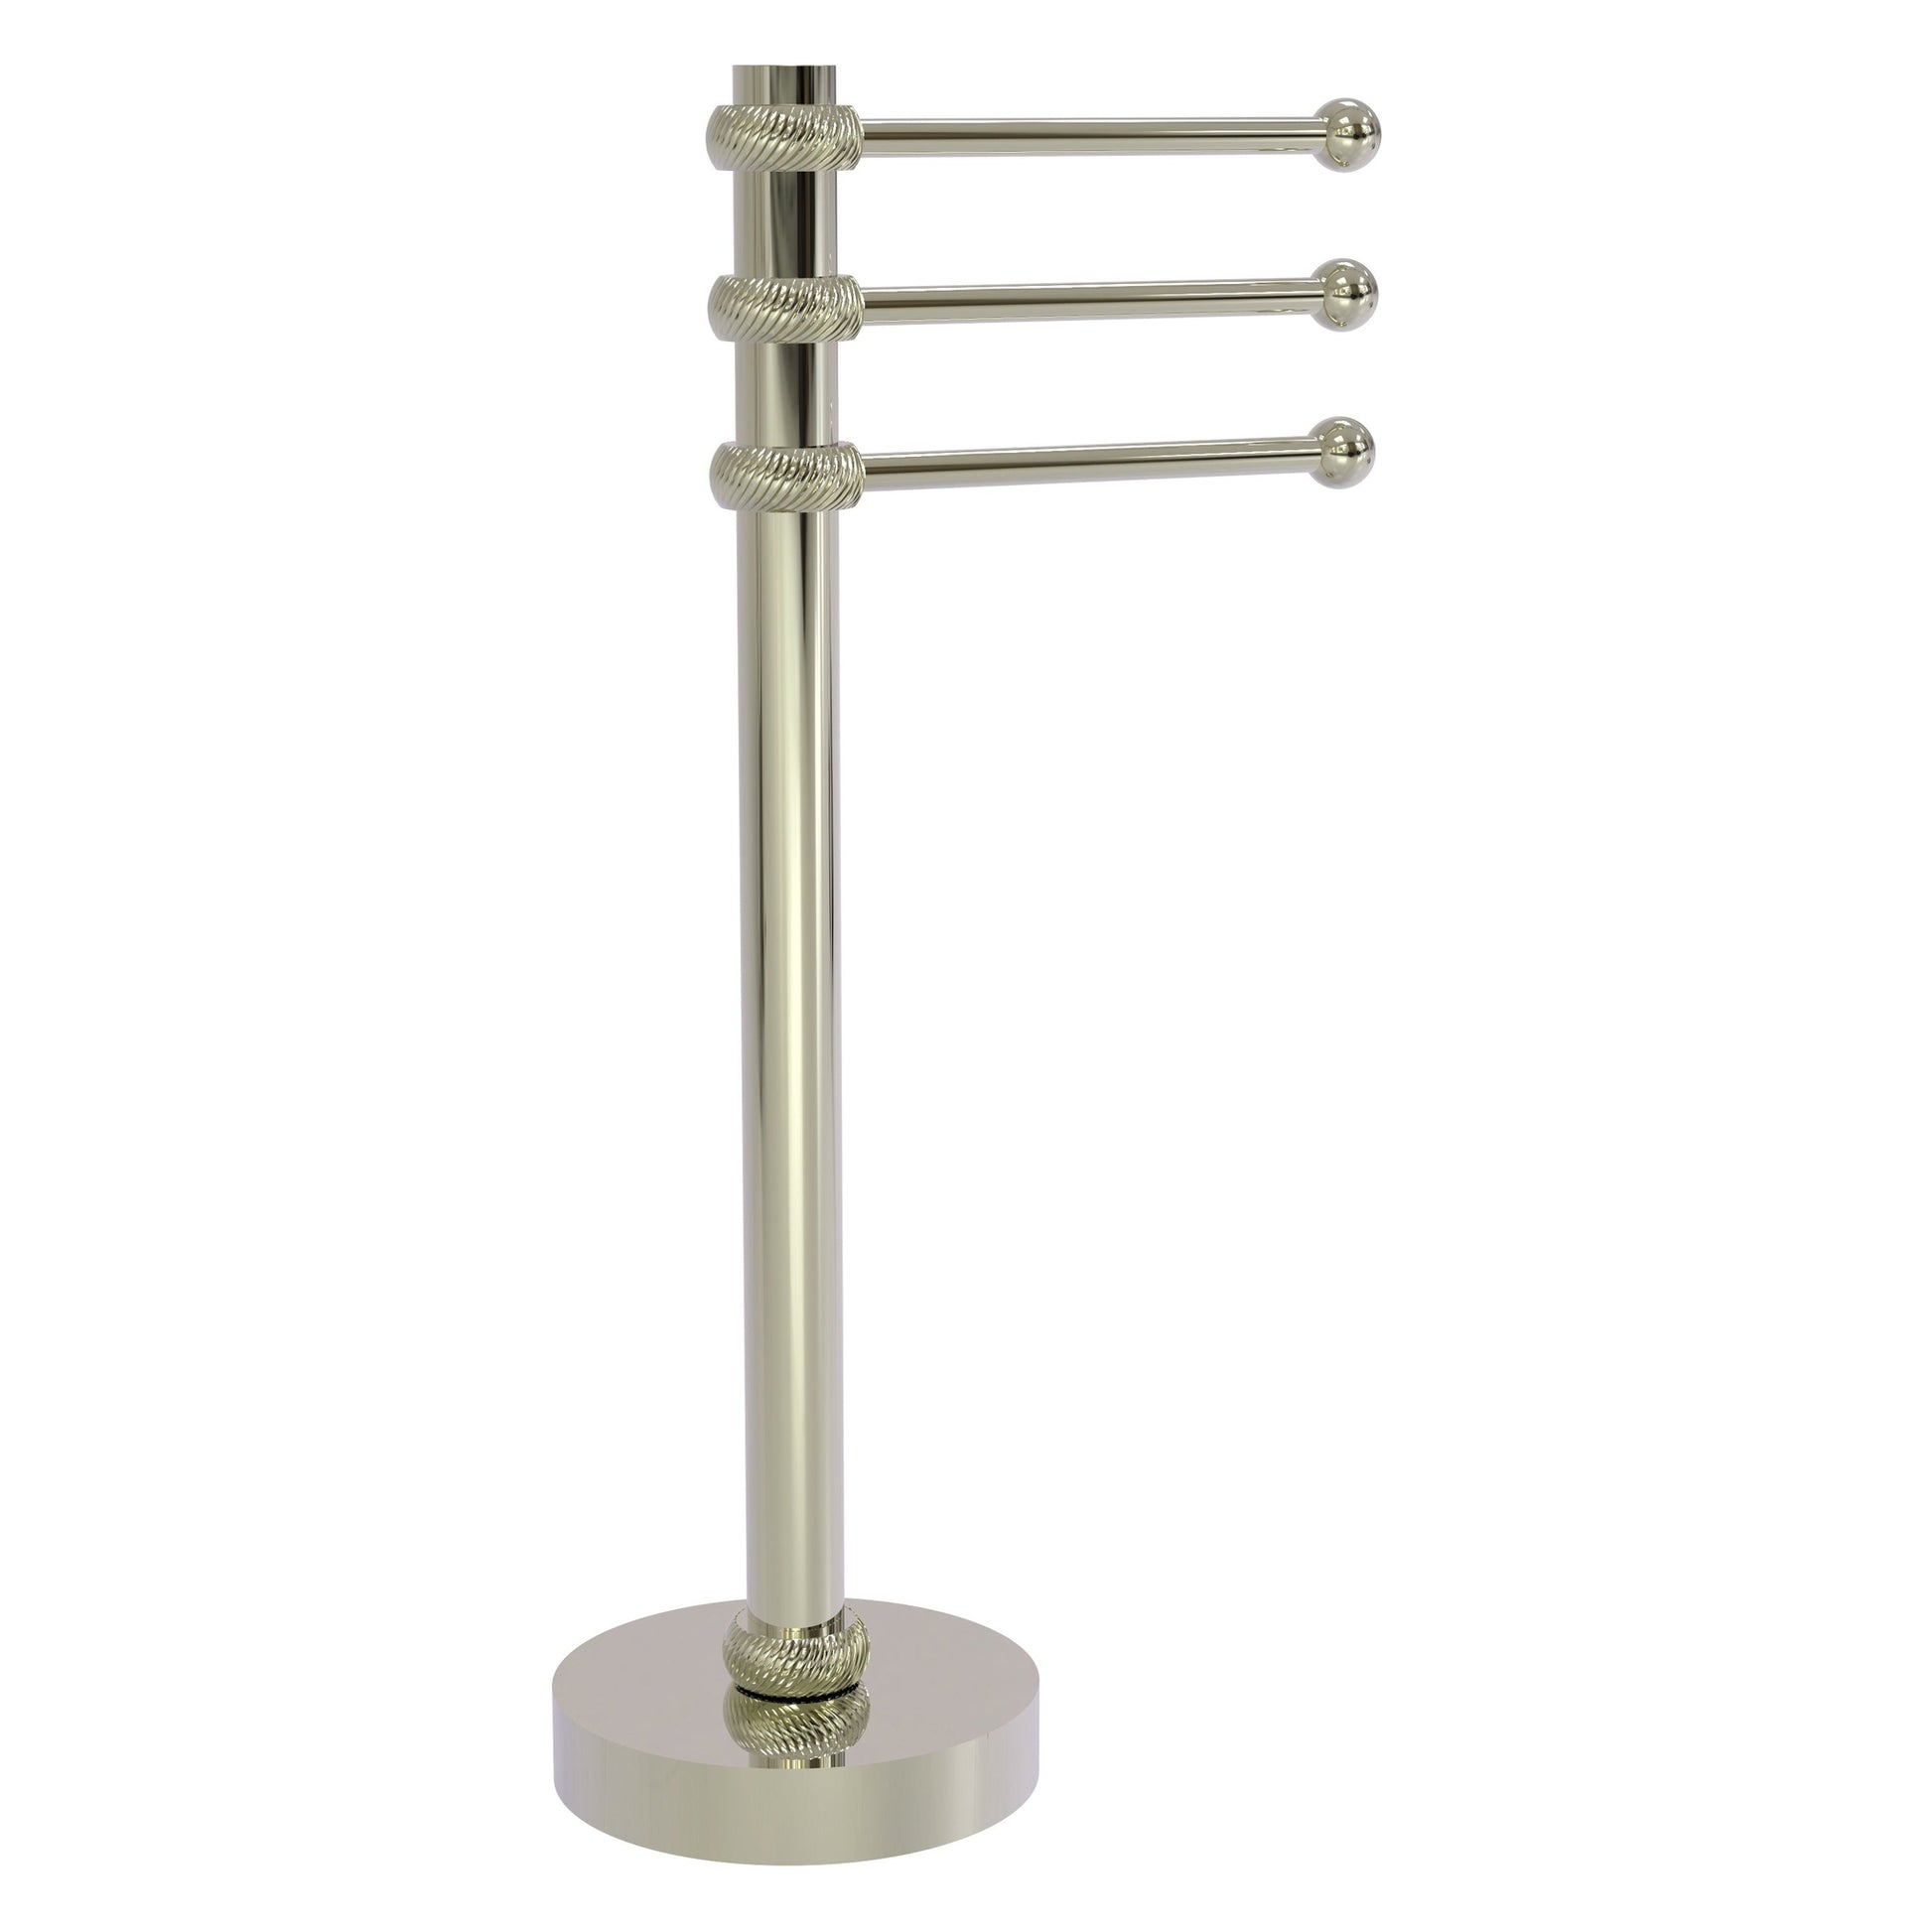 Allied Brass 973T 9" x 8" Polished Nickel Solid Brass Vanity Top 3-Swing Arm Guest Towel Holder With Twisted Accents